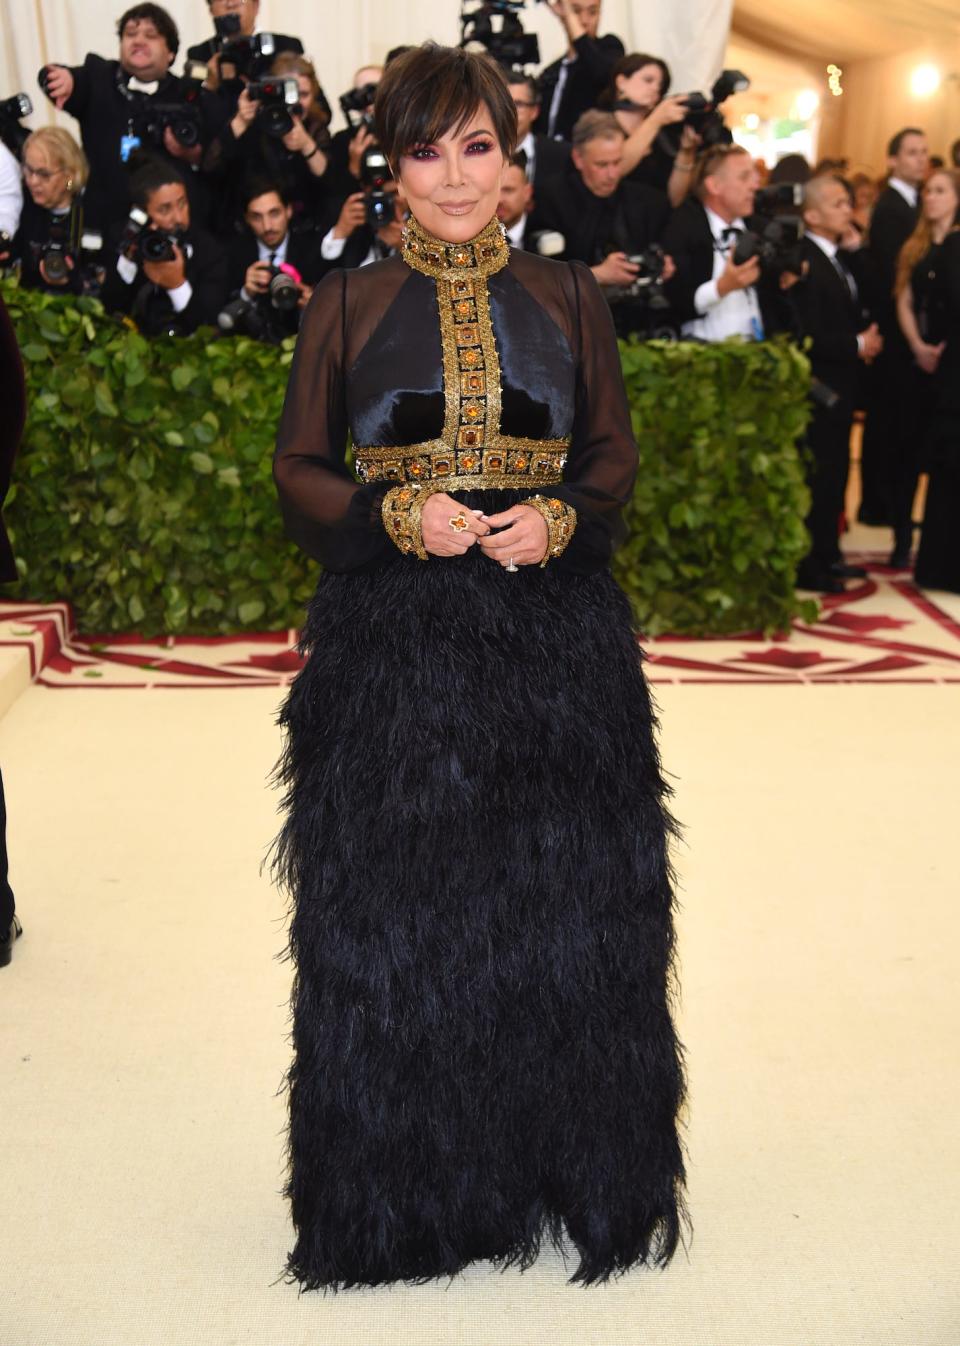 Kris Jenner at the Met Gala in New York City on May 7, 2018.